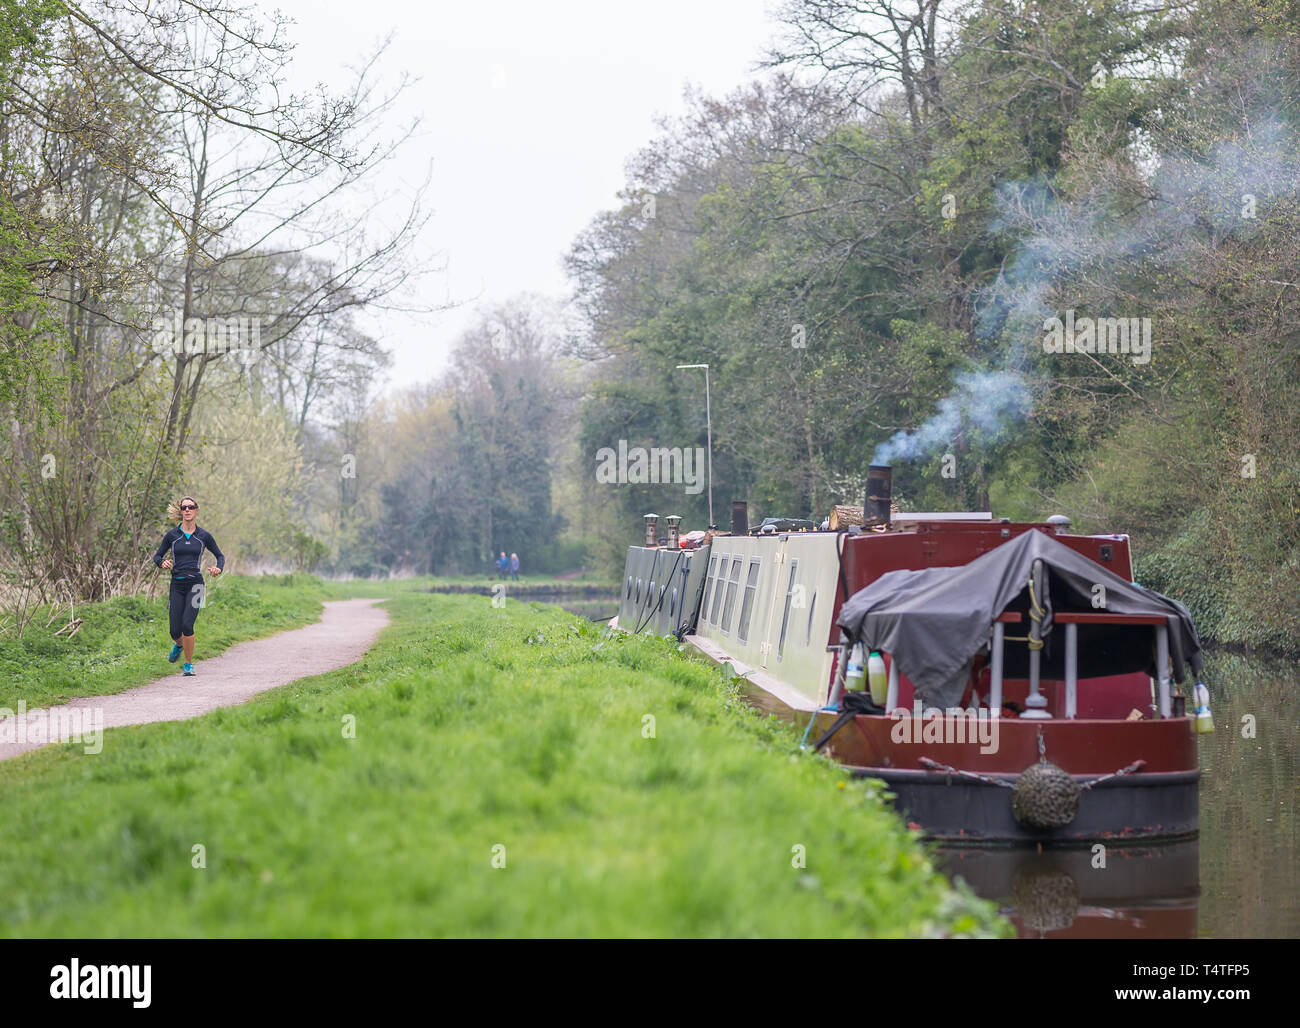 Narrowboat with smoking chimney moored alongside UK canal with female runner (front view) jogging along canal towpath. Stock Photo